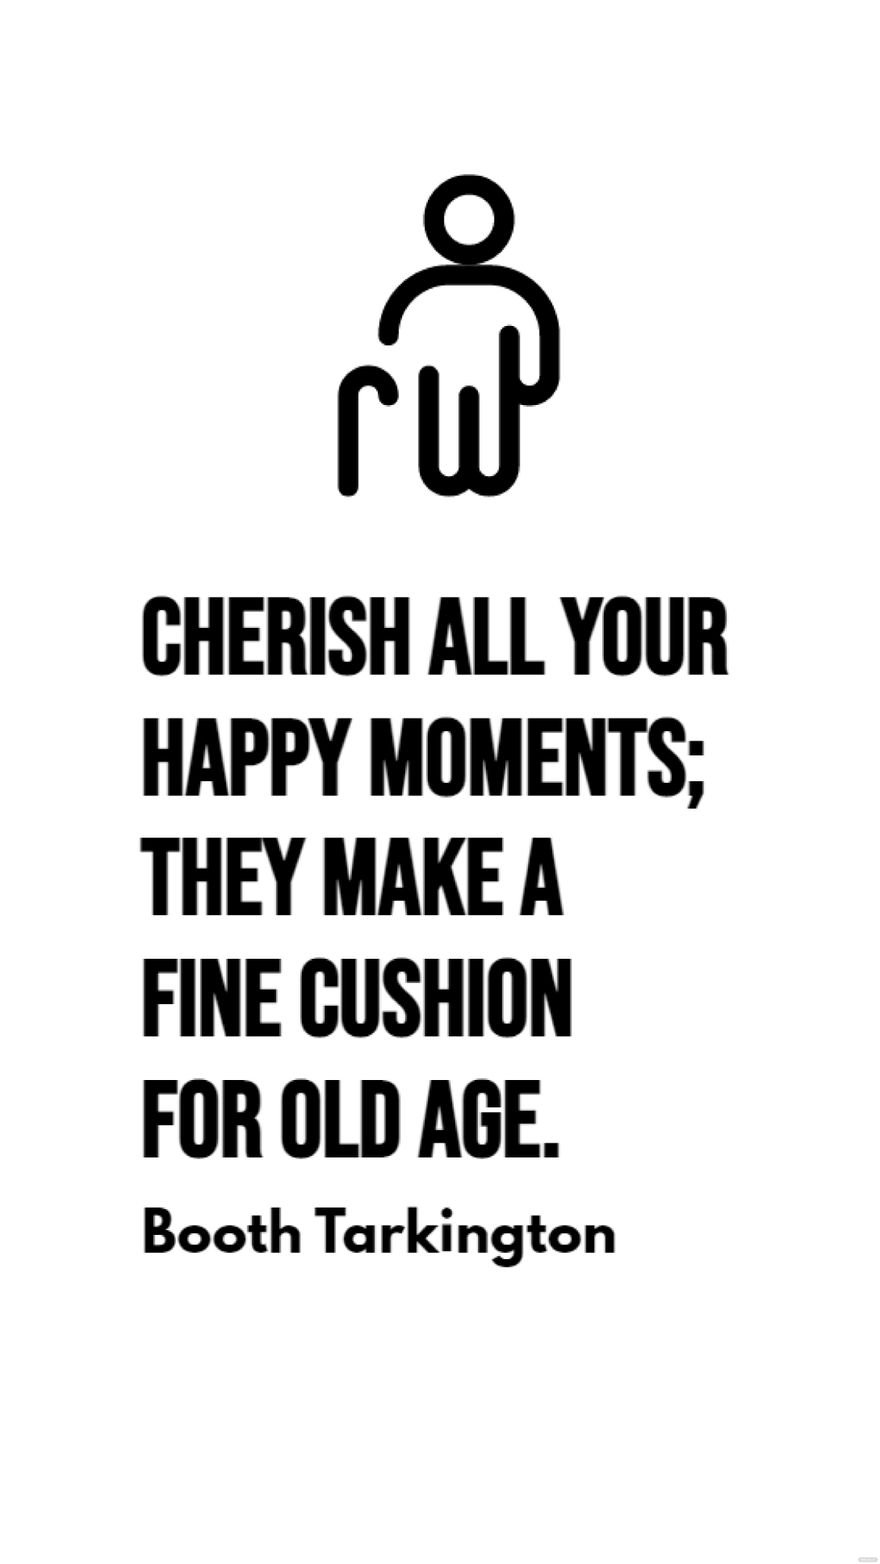 Free Booth Tarkington - Cherish all your happy moments; they make a fine cushion for old age. in JPG